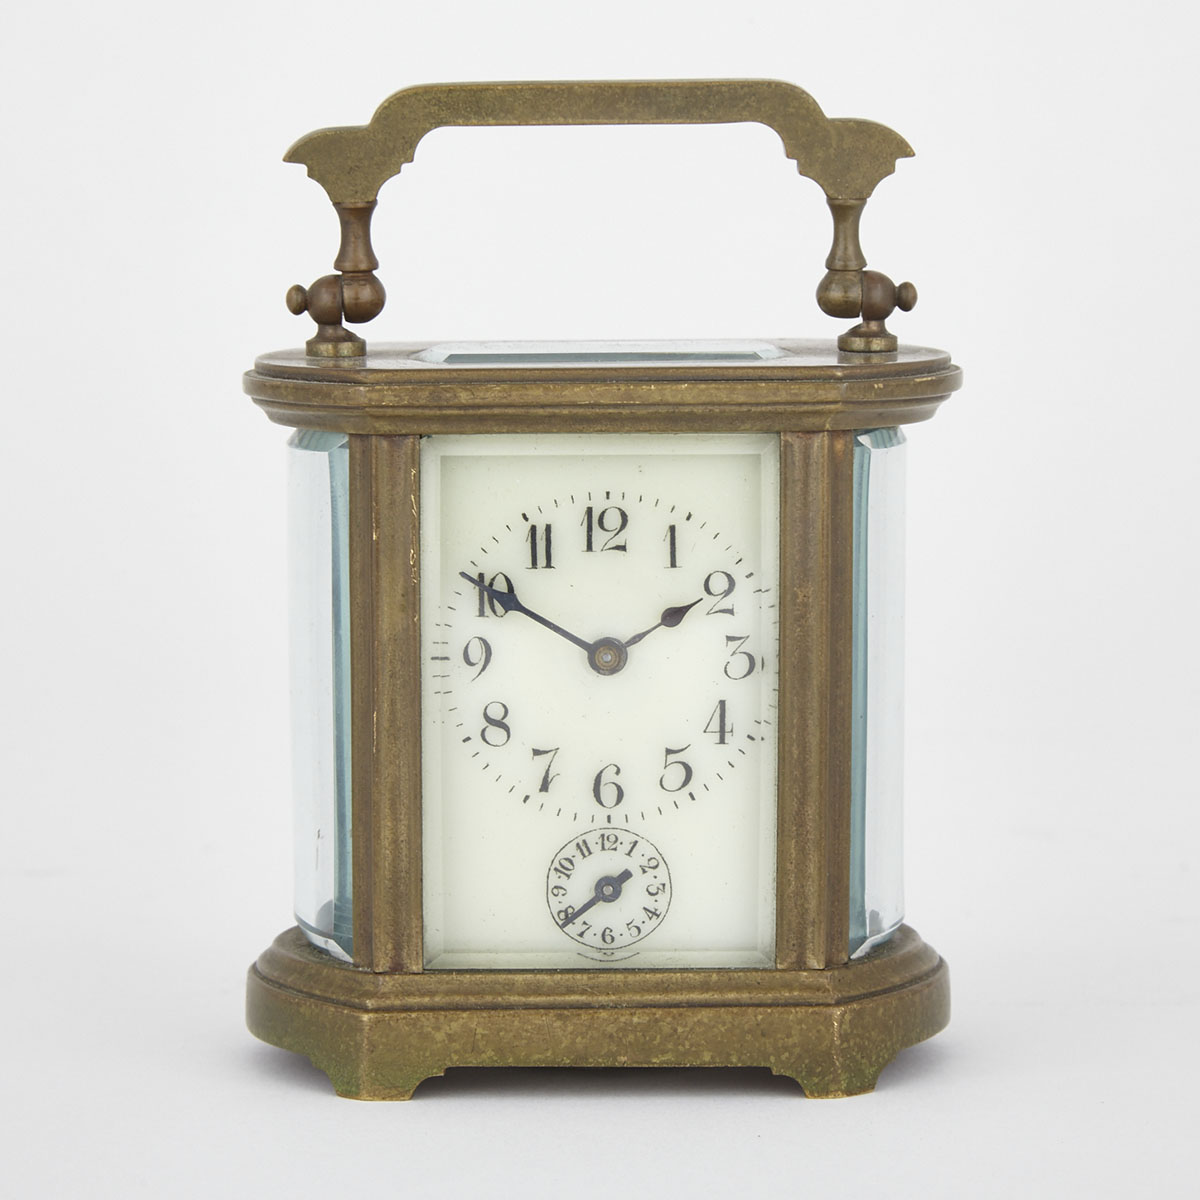 Small French Carriage Clock with Alarm, c.1900